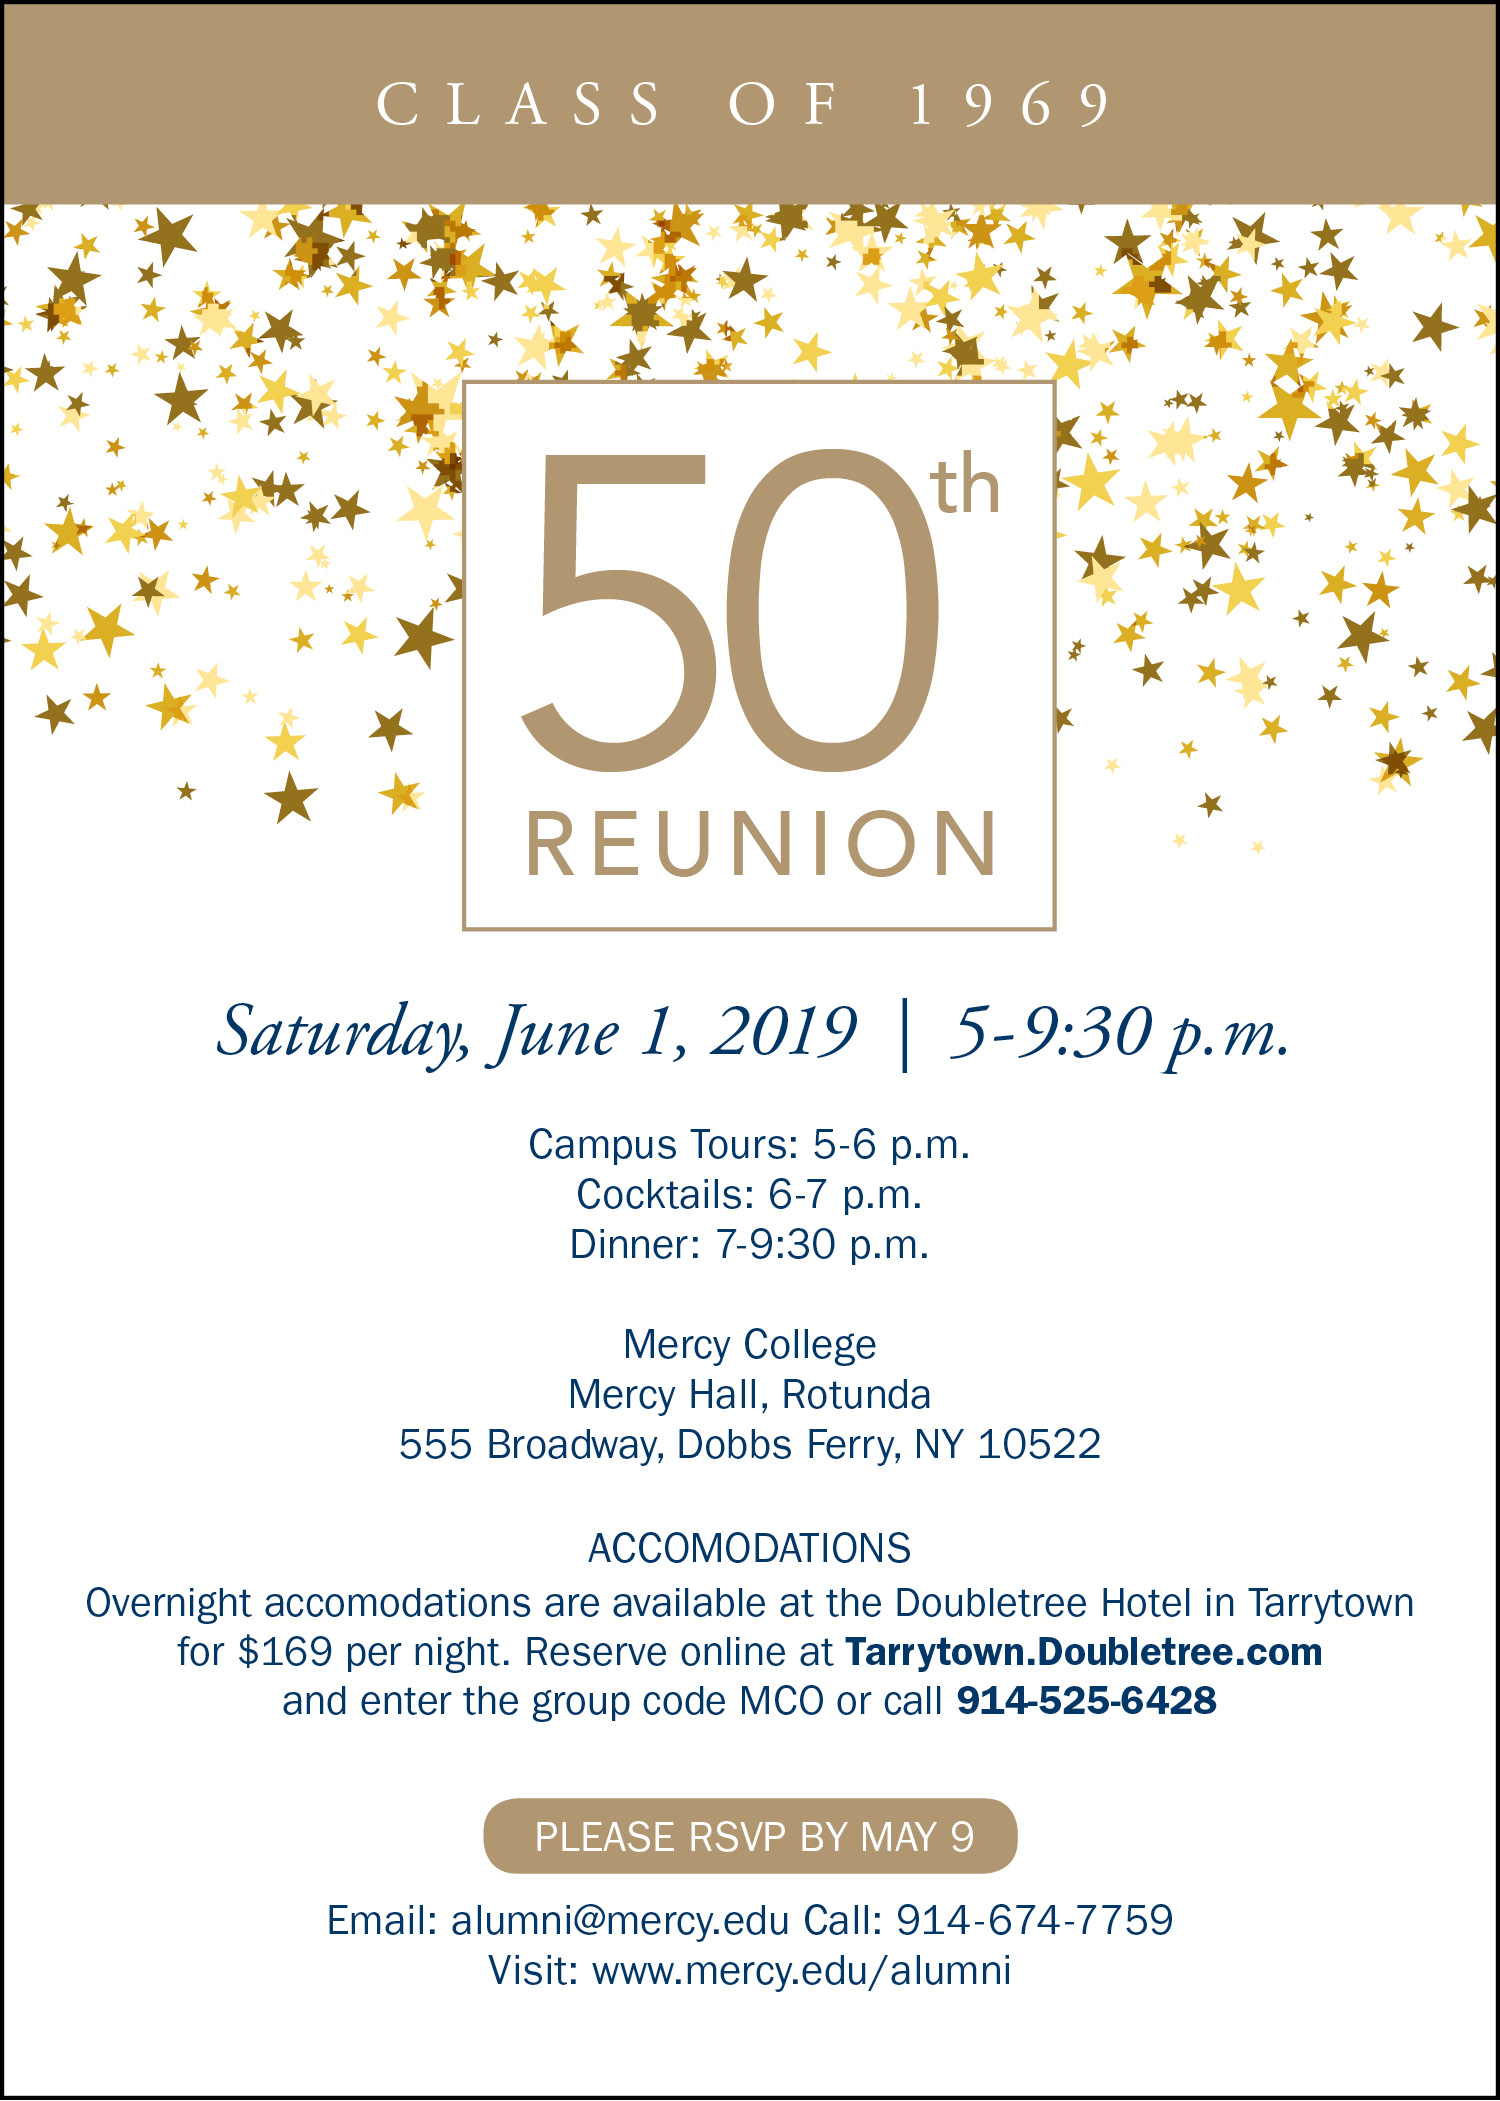 class of 1969 invitation to reunion-gold with stars